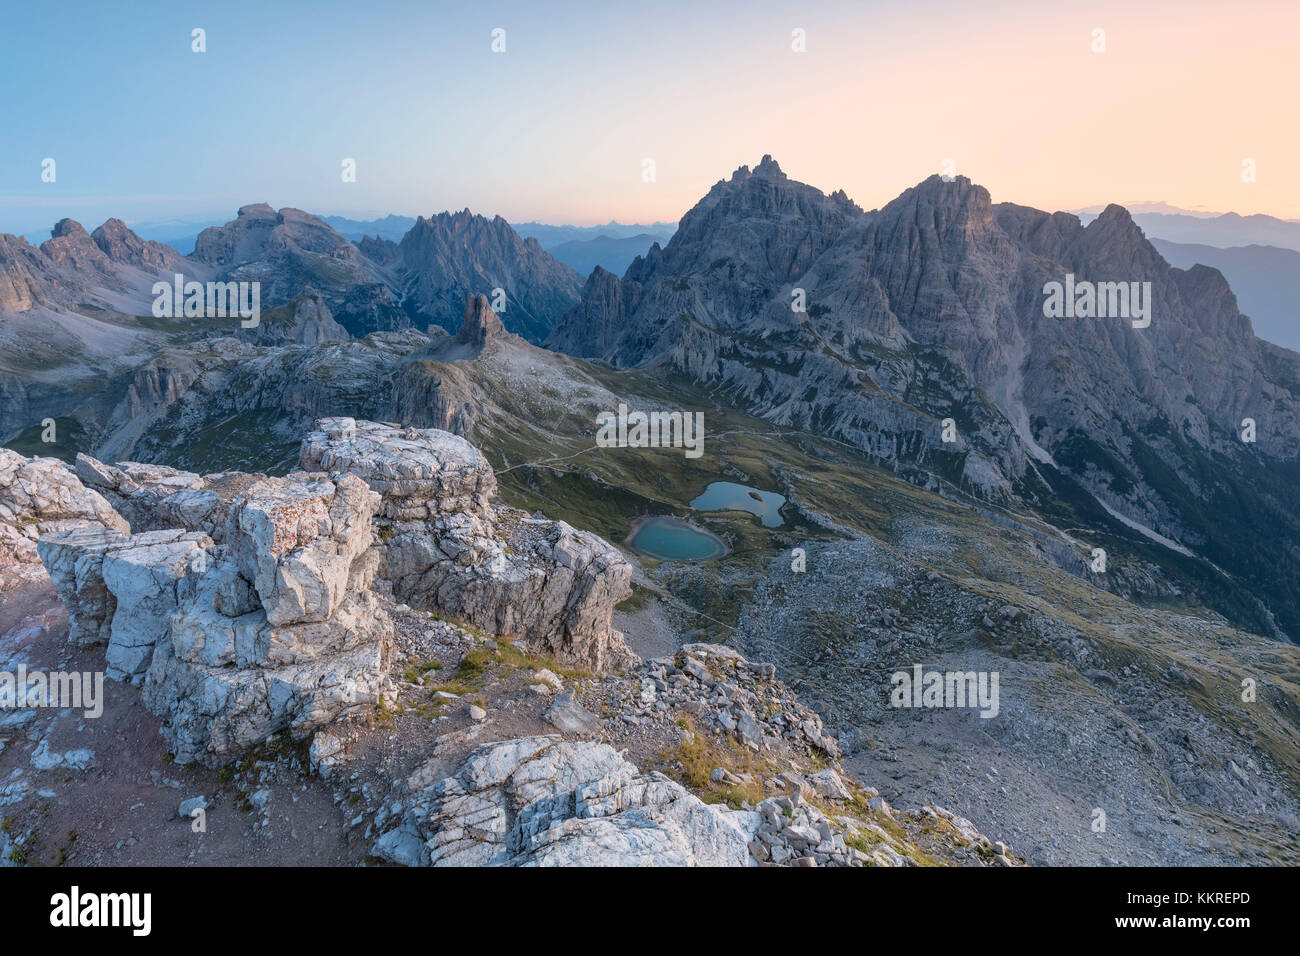 Sunrise from the top of mount Paterno / Paternkofel towards Tre Scarperi group and Laghi dei Piani / Bodenseen, Sexten Dolomites, South Tyrol, Bolzano, Italy Stock Photo